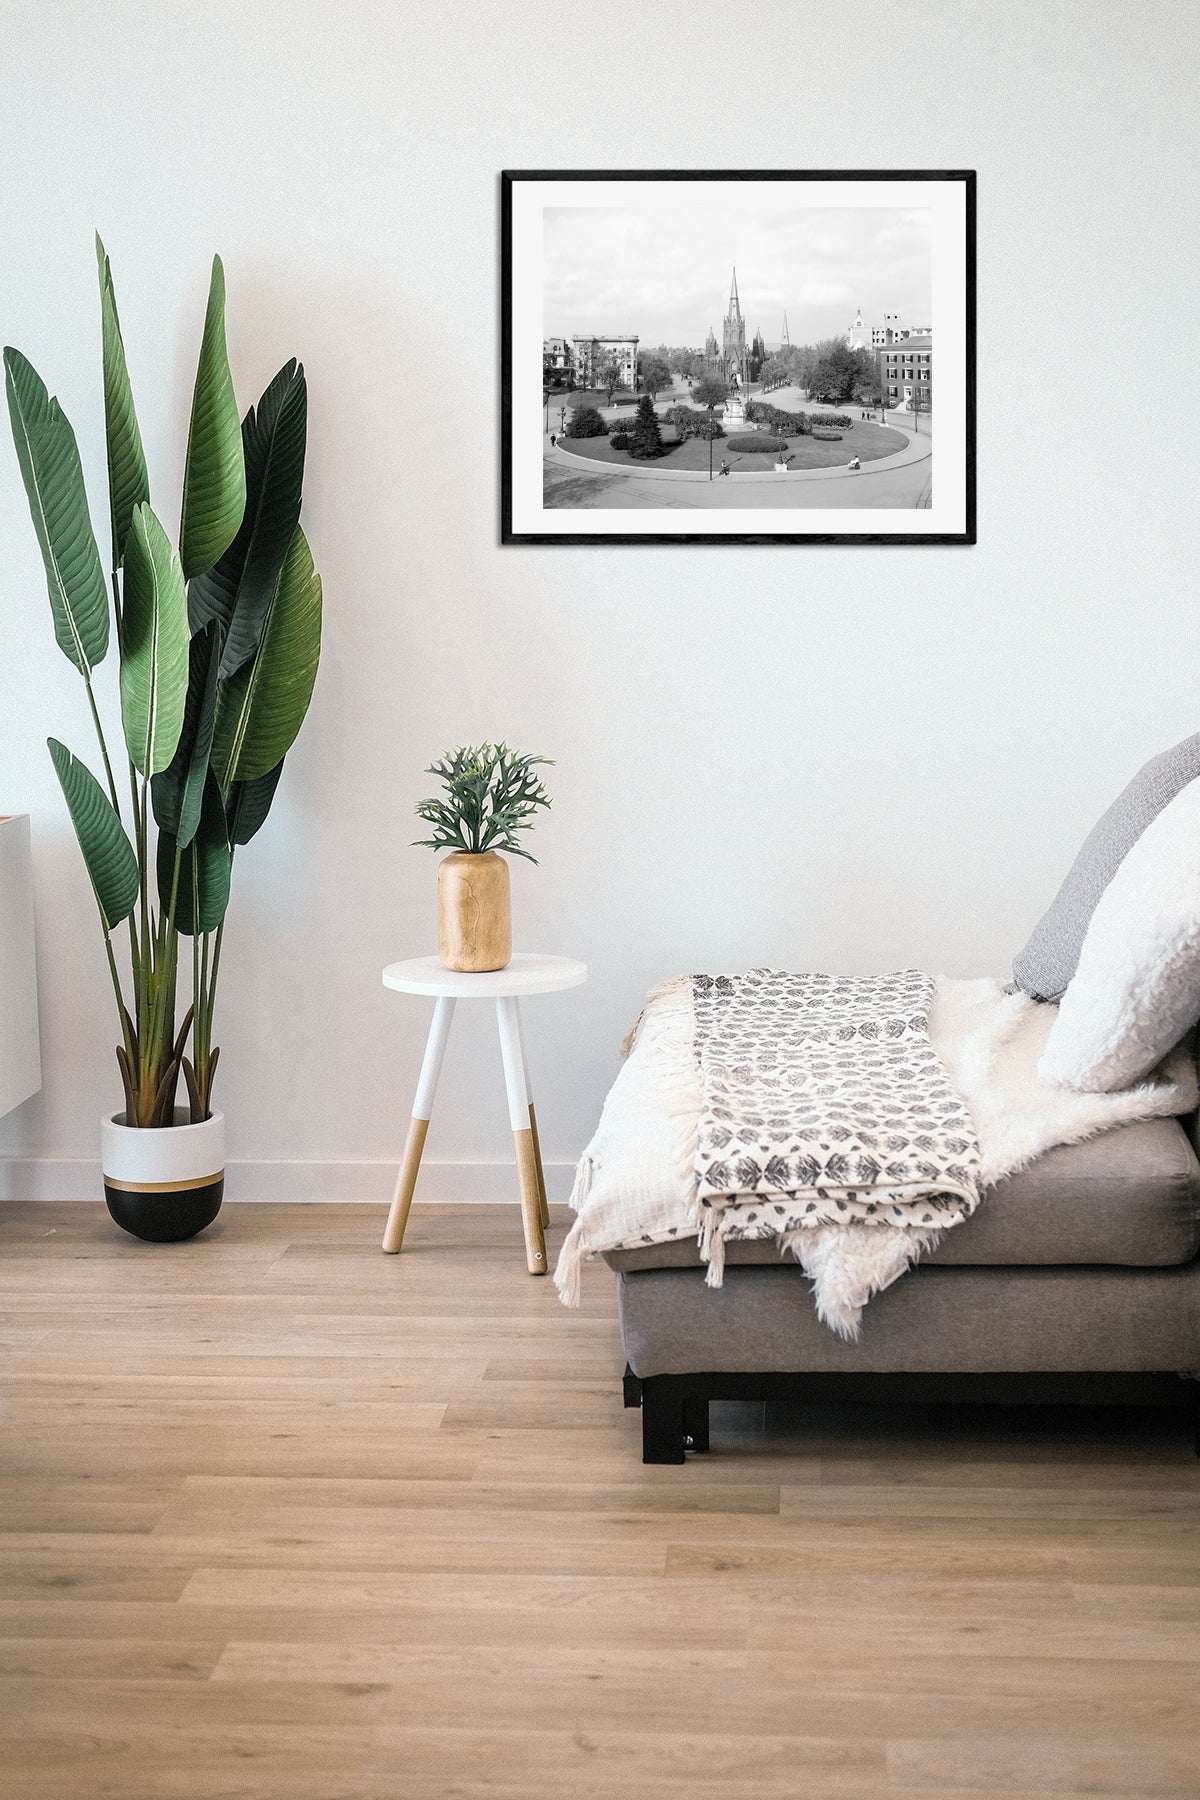 A living room with a framed paper print of a vintage image of Thomas Circle